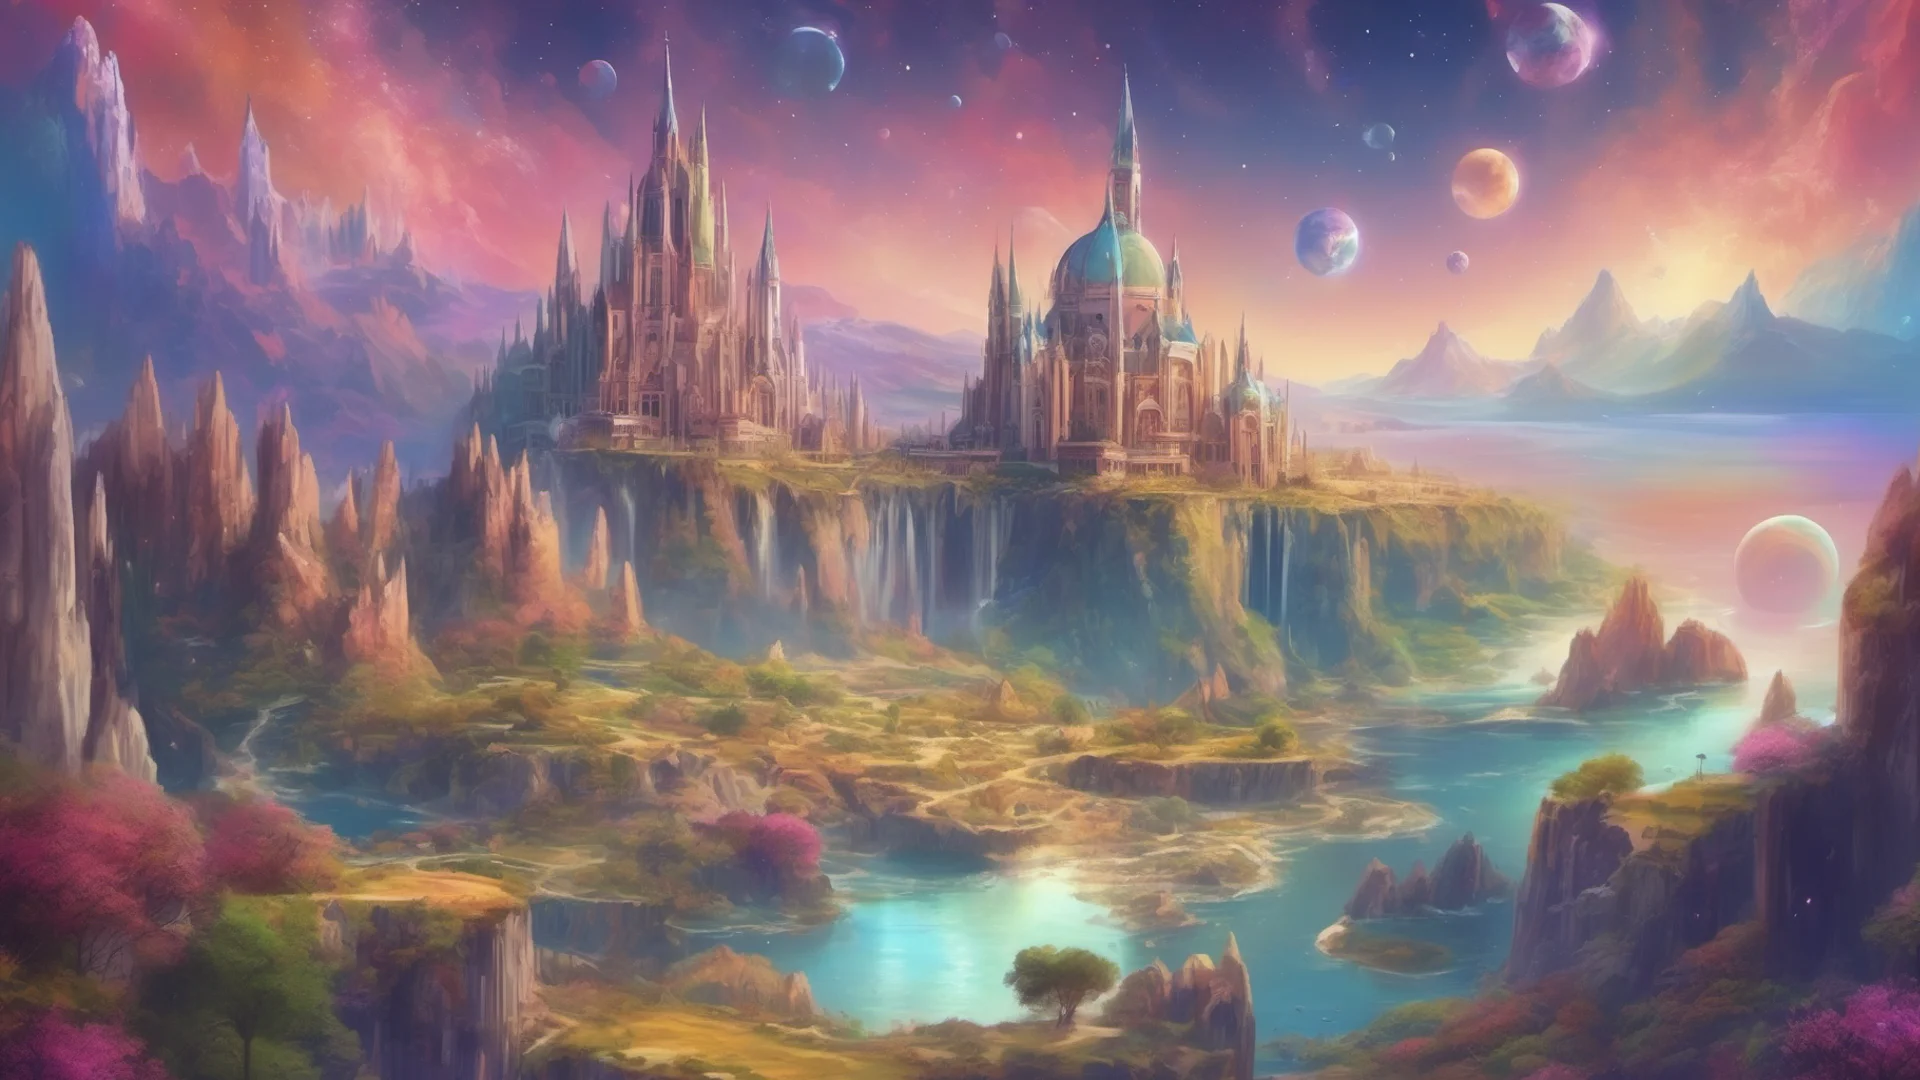 aifantasy landscape colorful palace royal cathedrals on cliffs islands relaxing stary ethereal sky realistic planets high circle colorful earth like planet wide